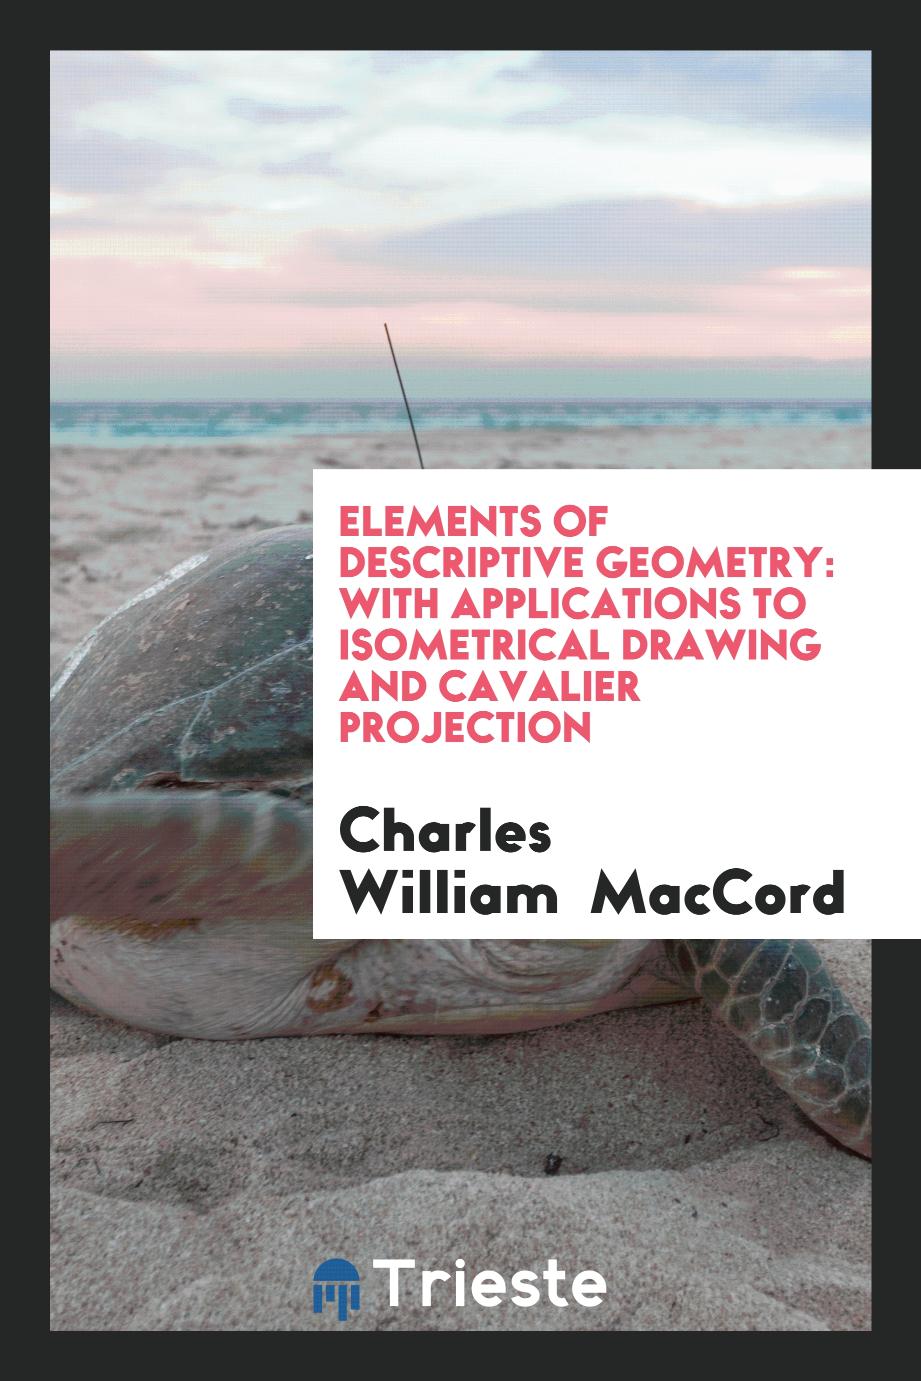 Elements of Descriptive Geometry: With Applications to Isometrical Drawing and Cavalier Projection